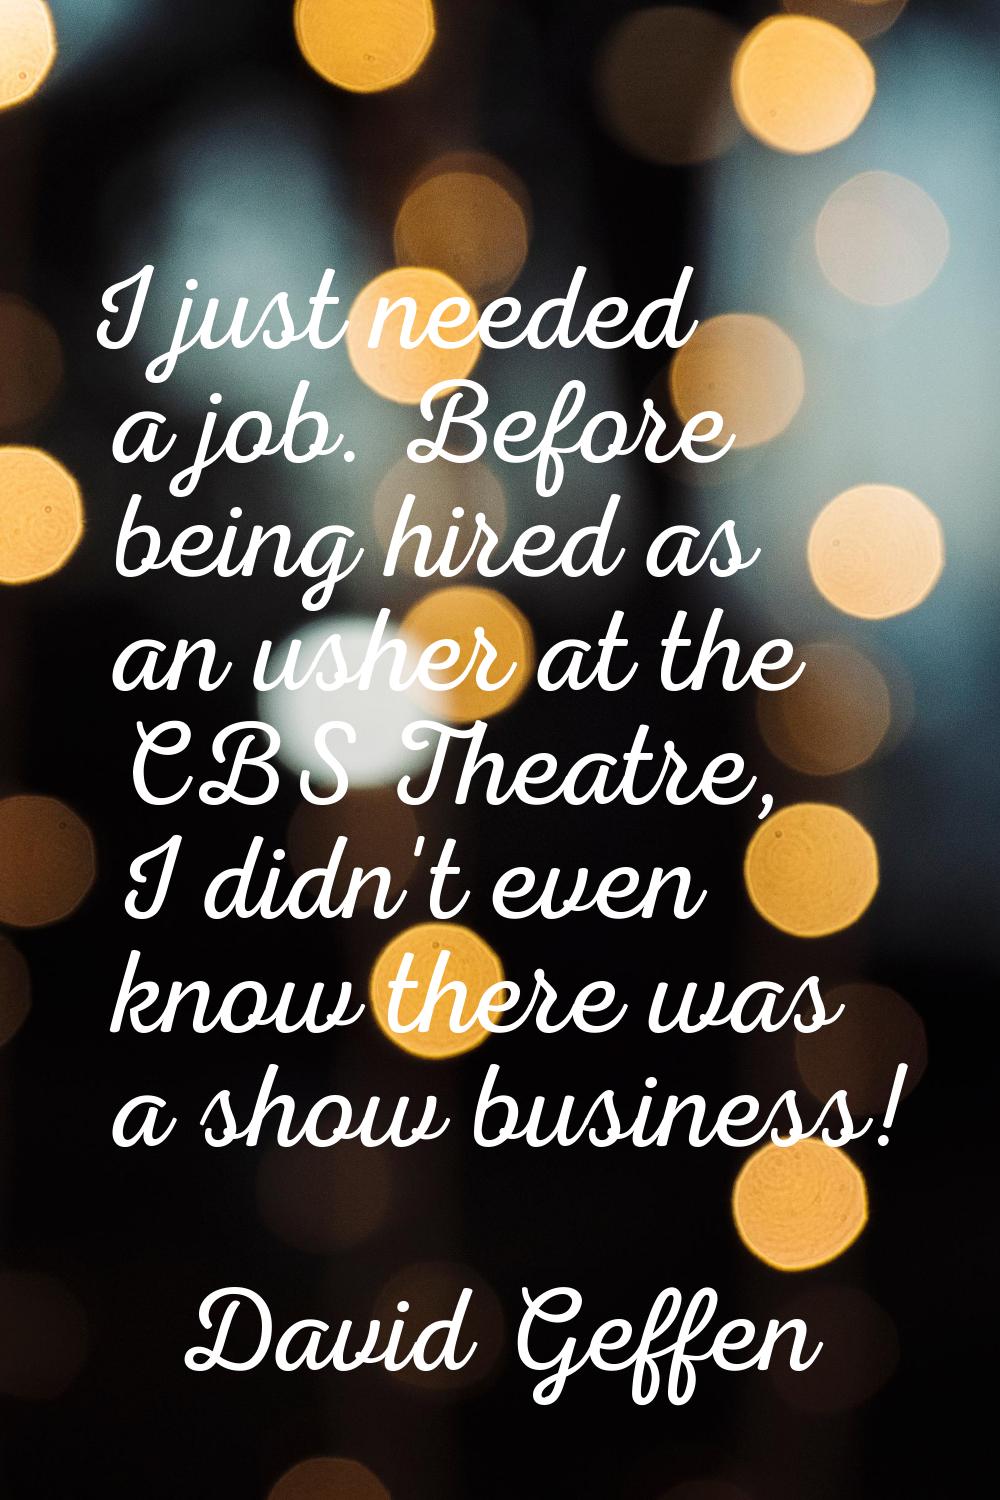 I just needed a job. Before being hired as an usher at the CBS Theatre, I didn't even know there wa